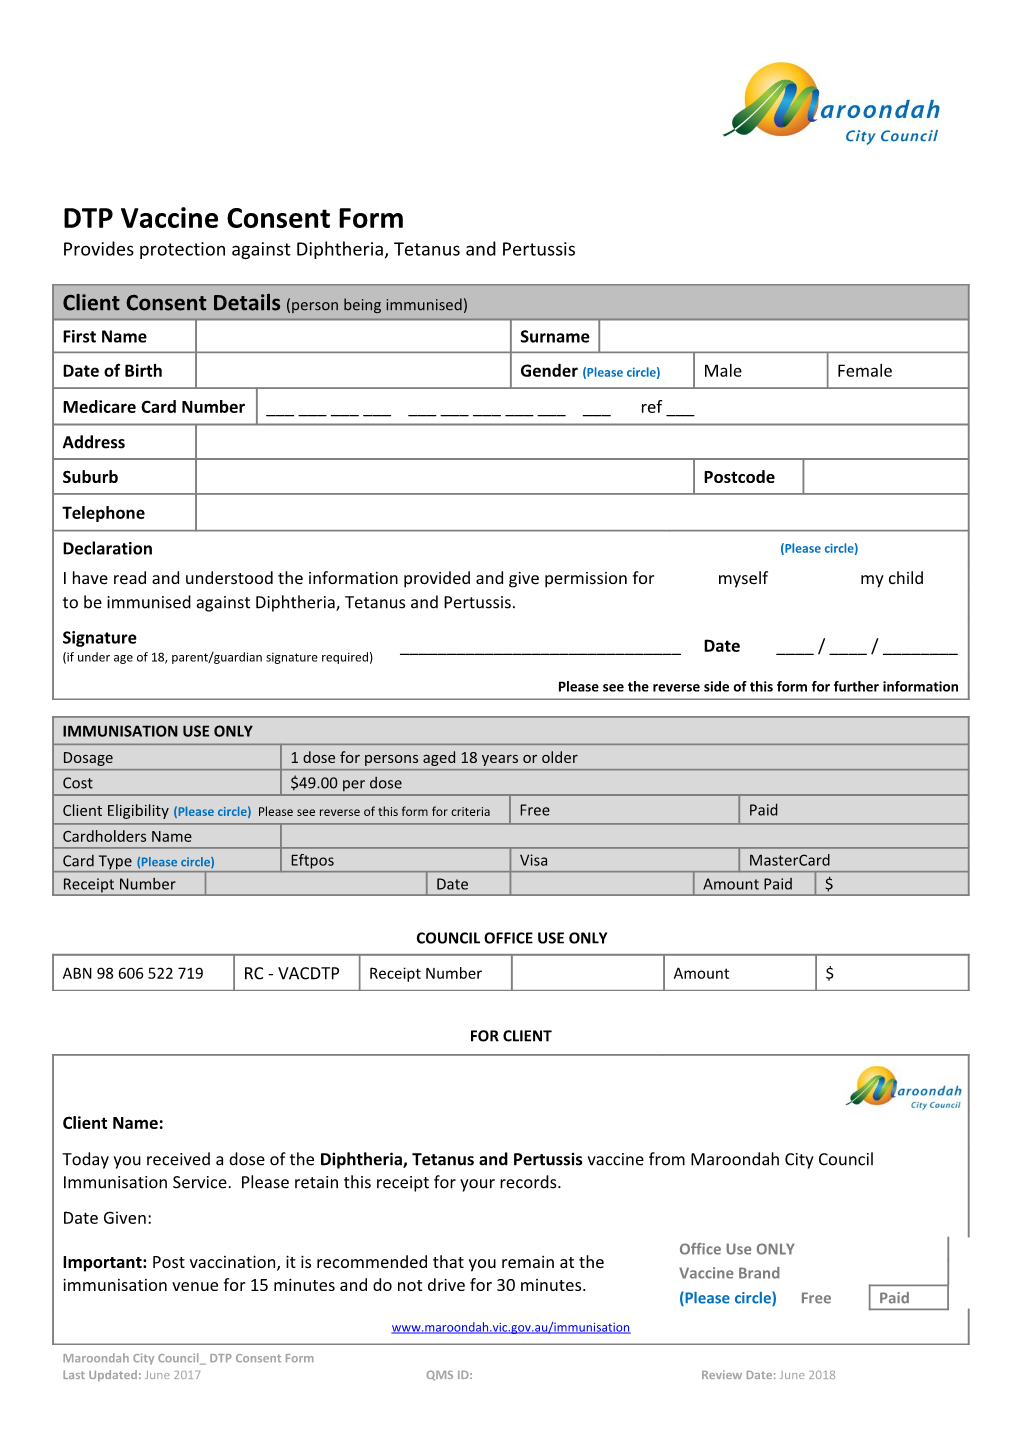 DTP Vaccine Consent Form Provides Protection Against Diphtheria, Tetanus and Pertussis